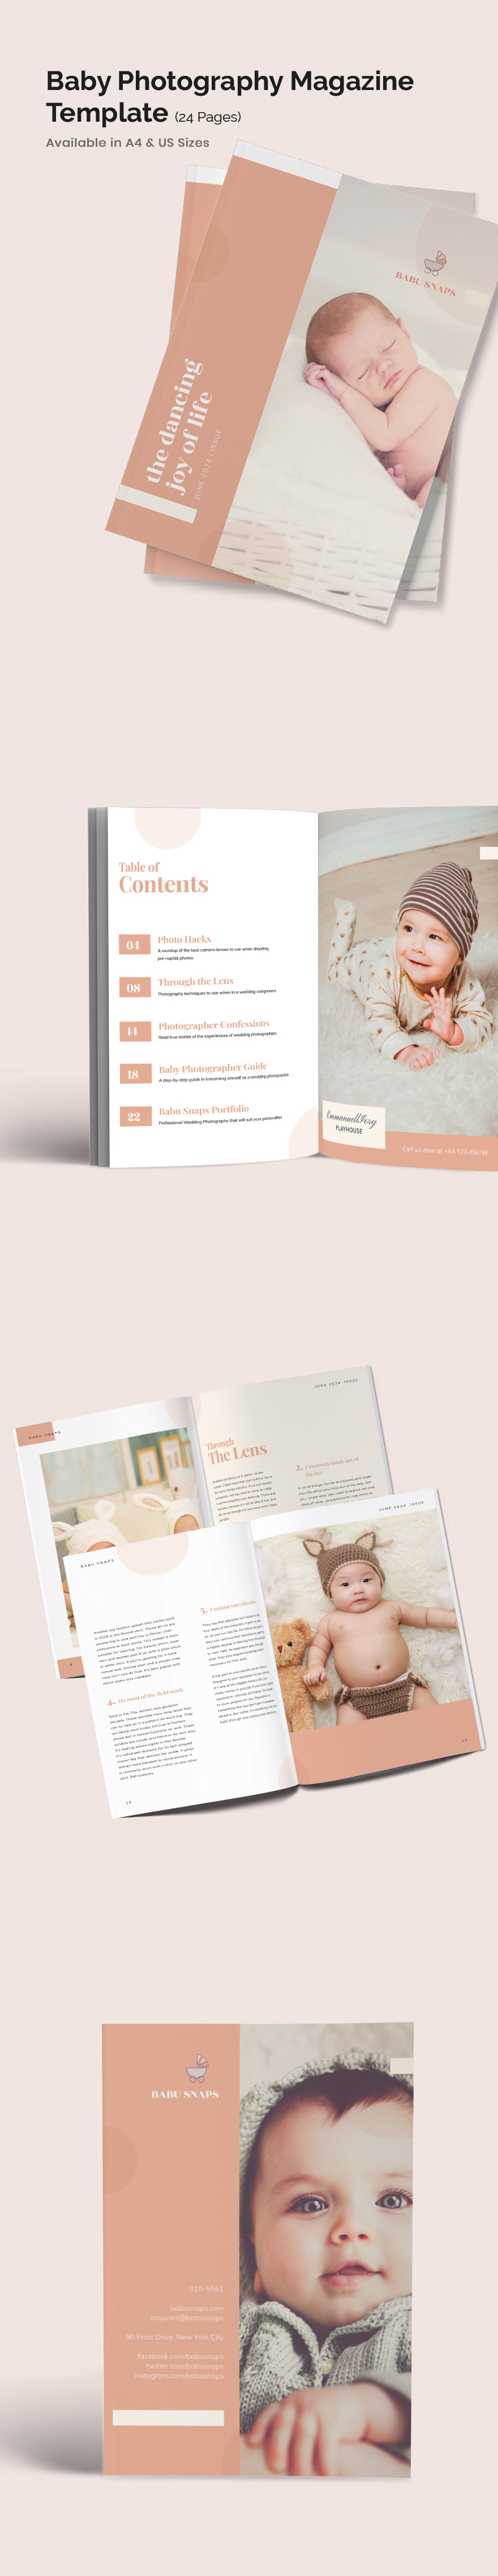 Baby Photography Magazine Template